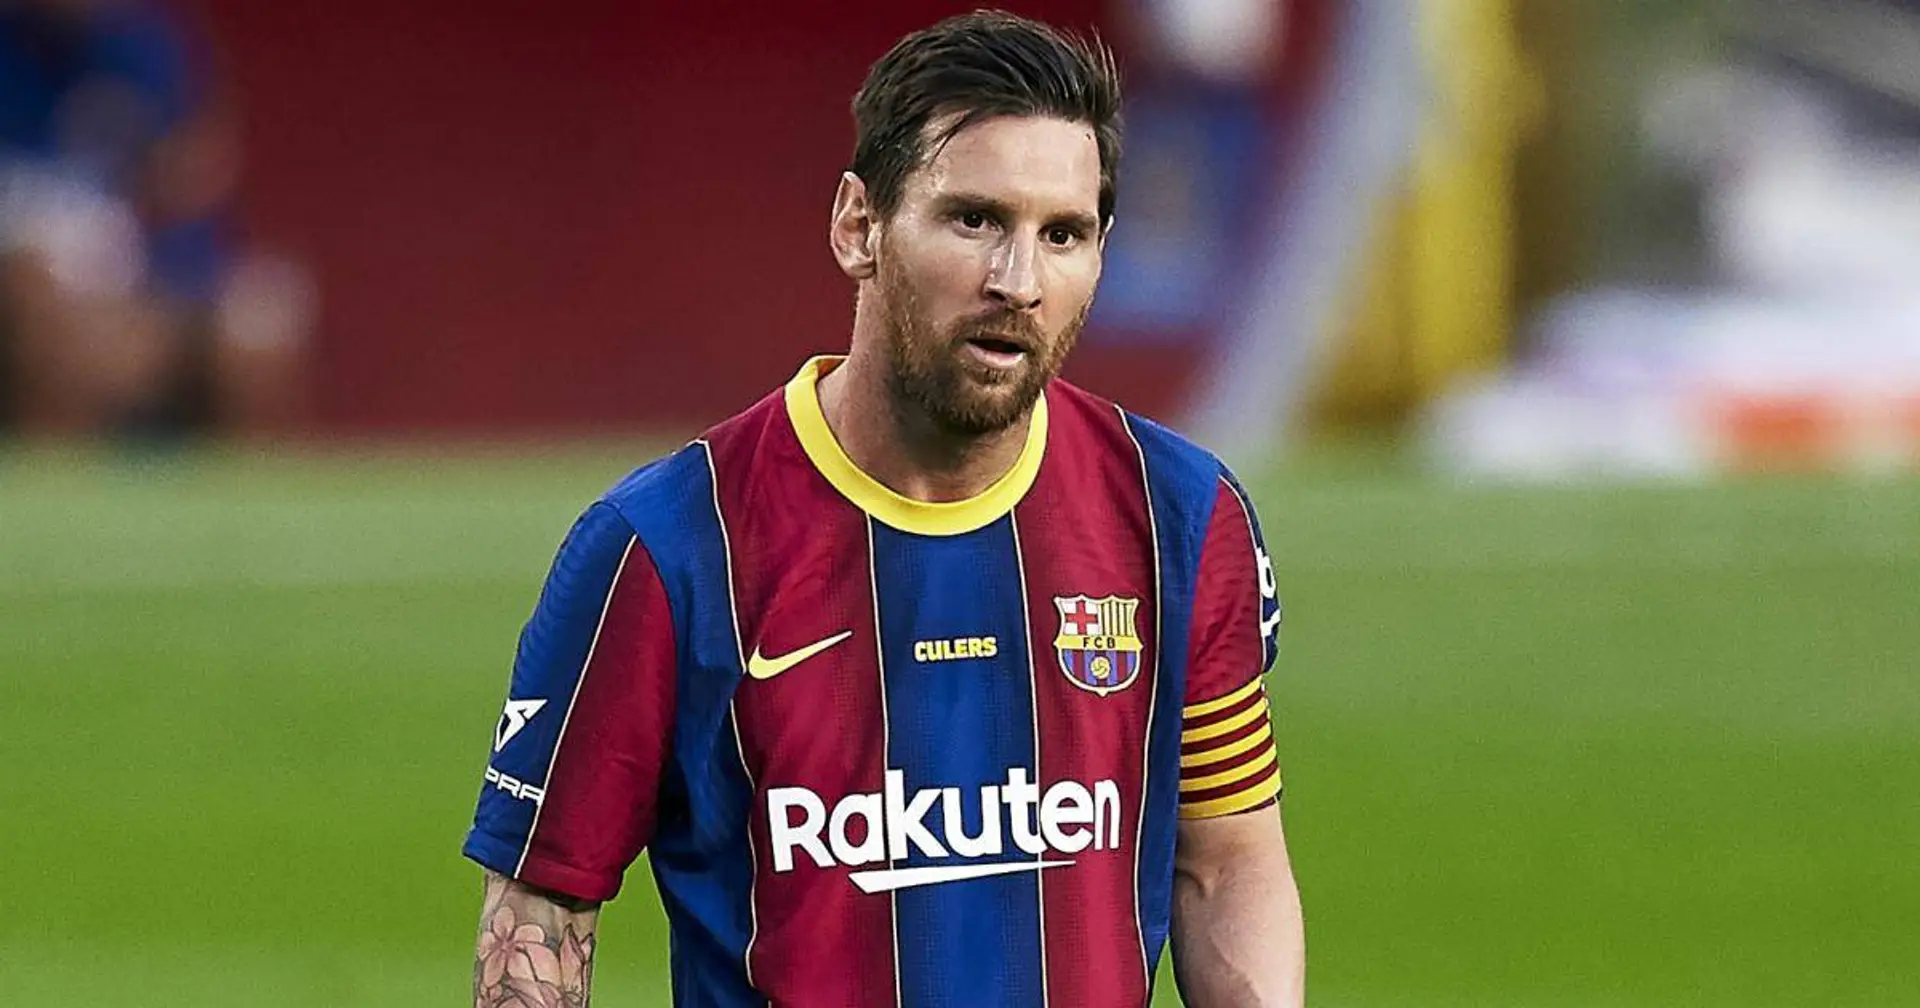 How Leo Messi ranks among football stars with most followers on social media